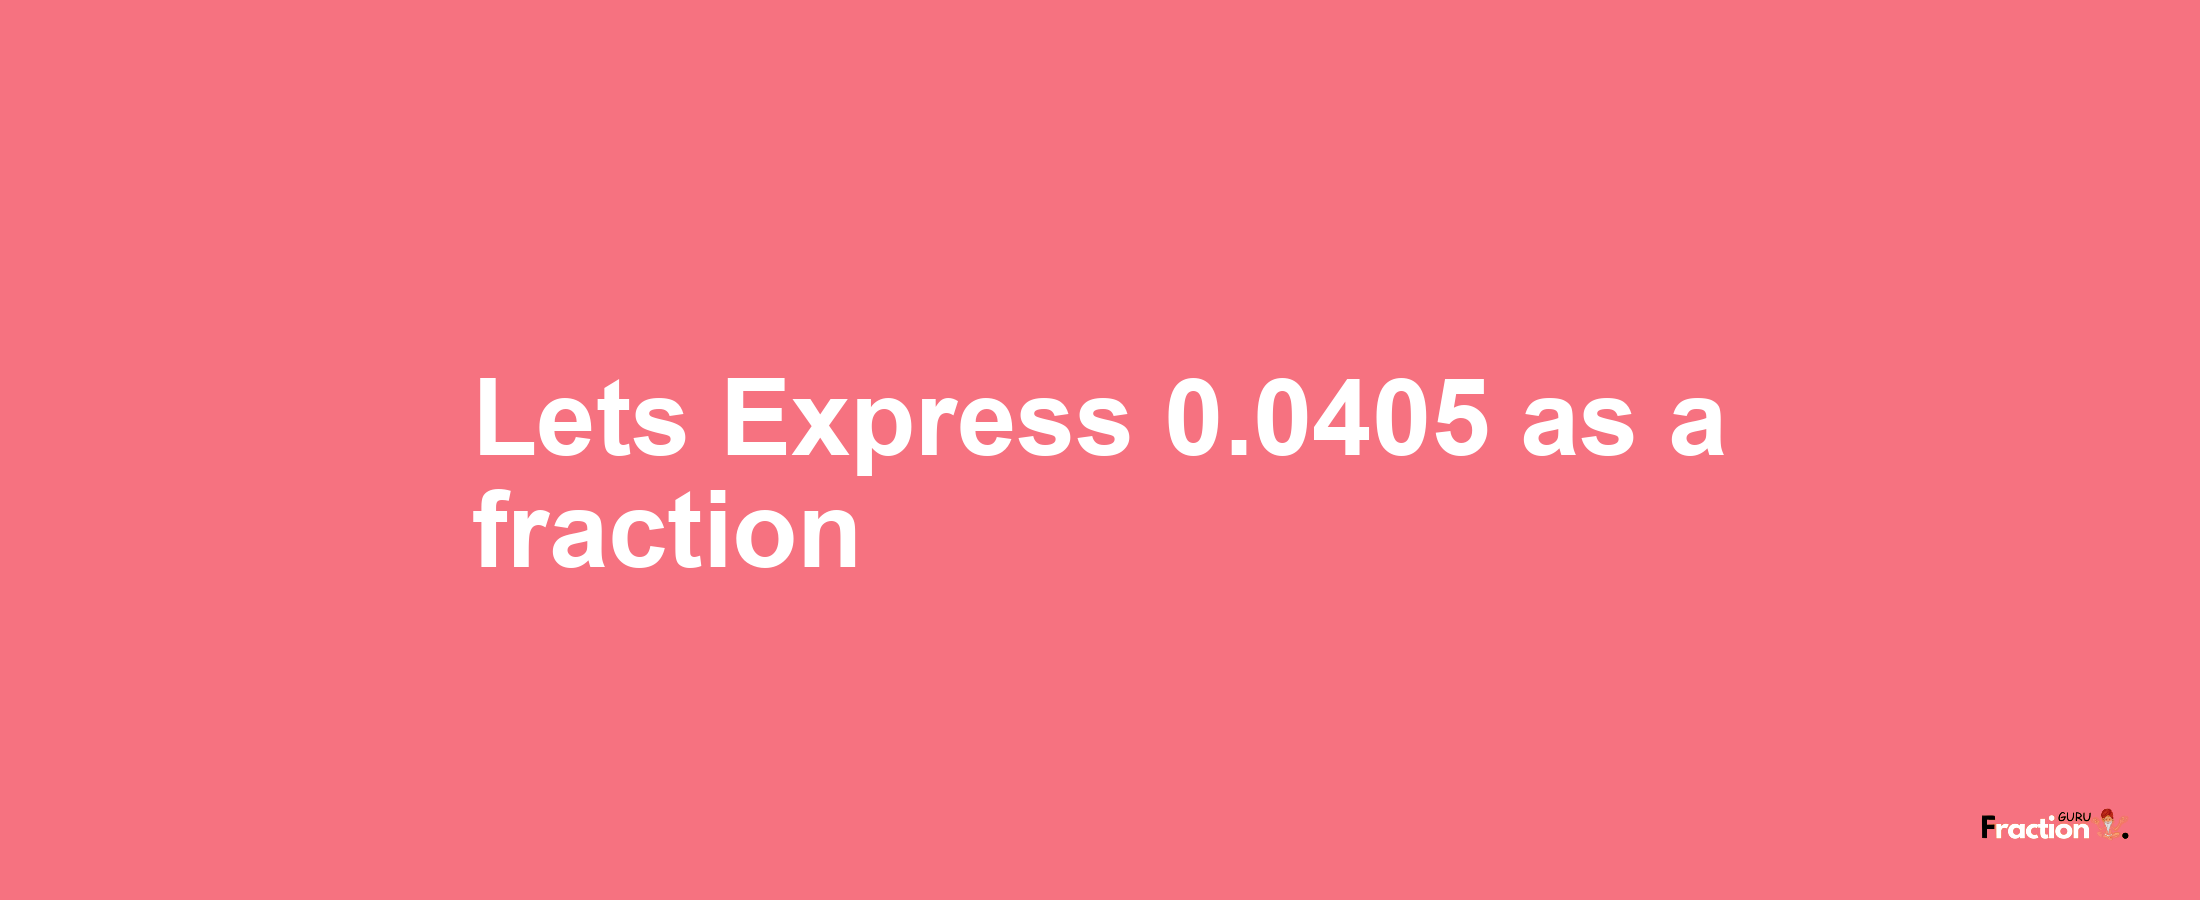 Lets Express 0.0405 as afraction